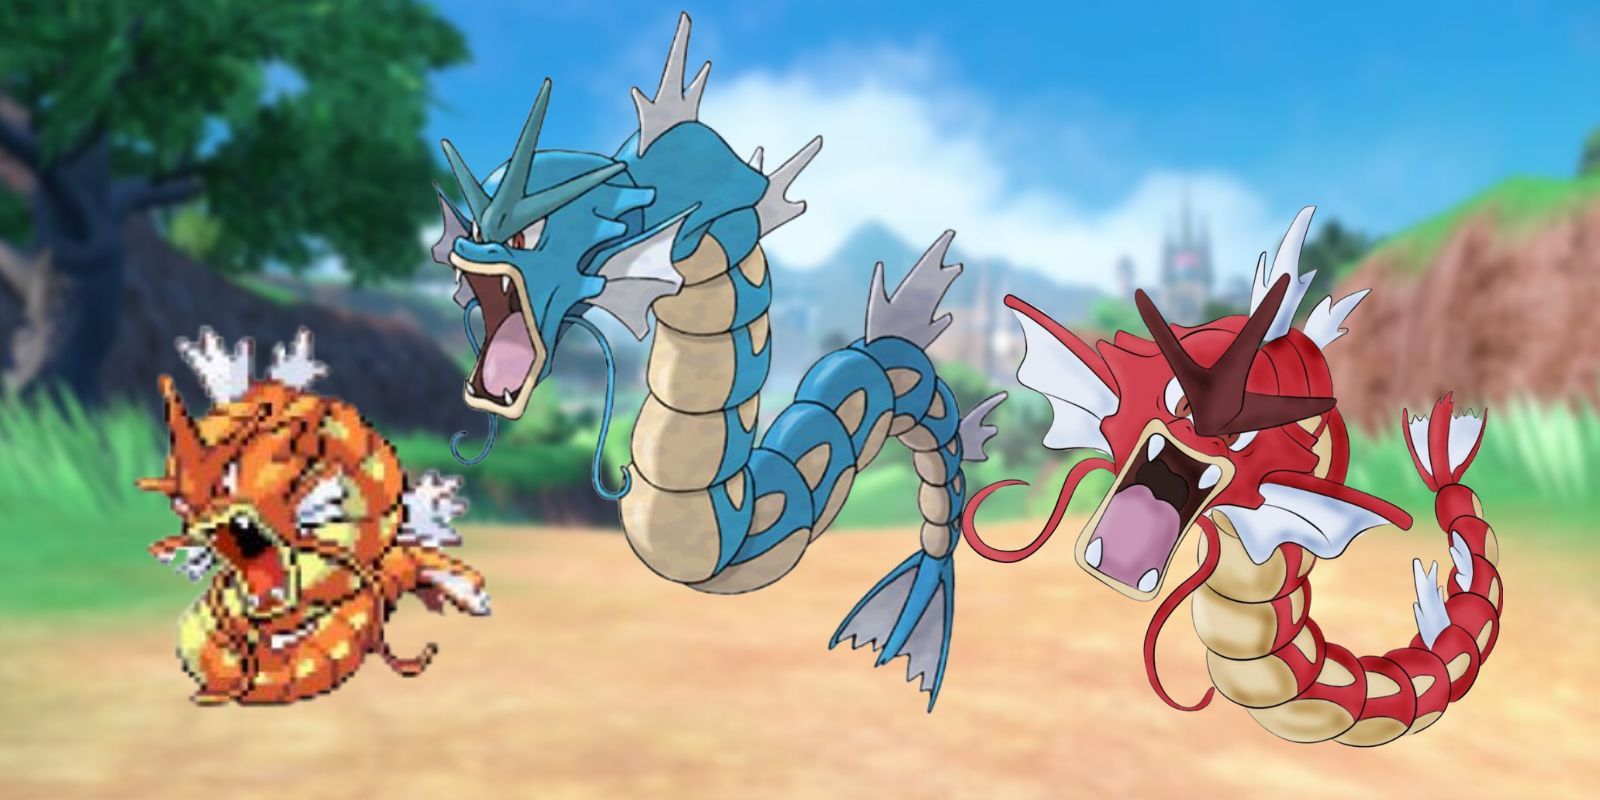 Gyarados in common form and flanked by the original orange shiny and the current red shiny versions.